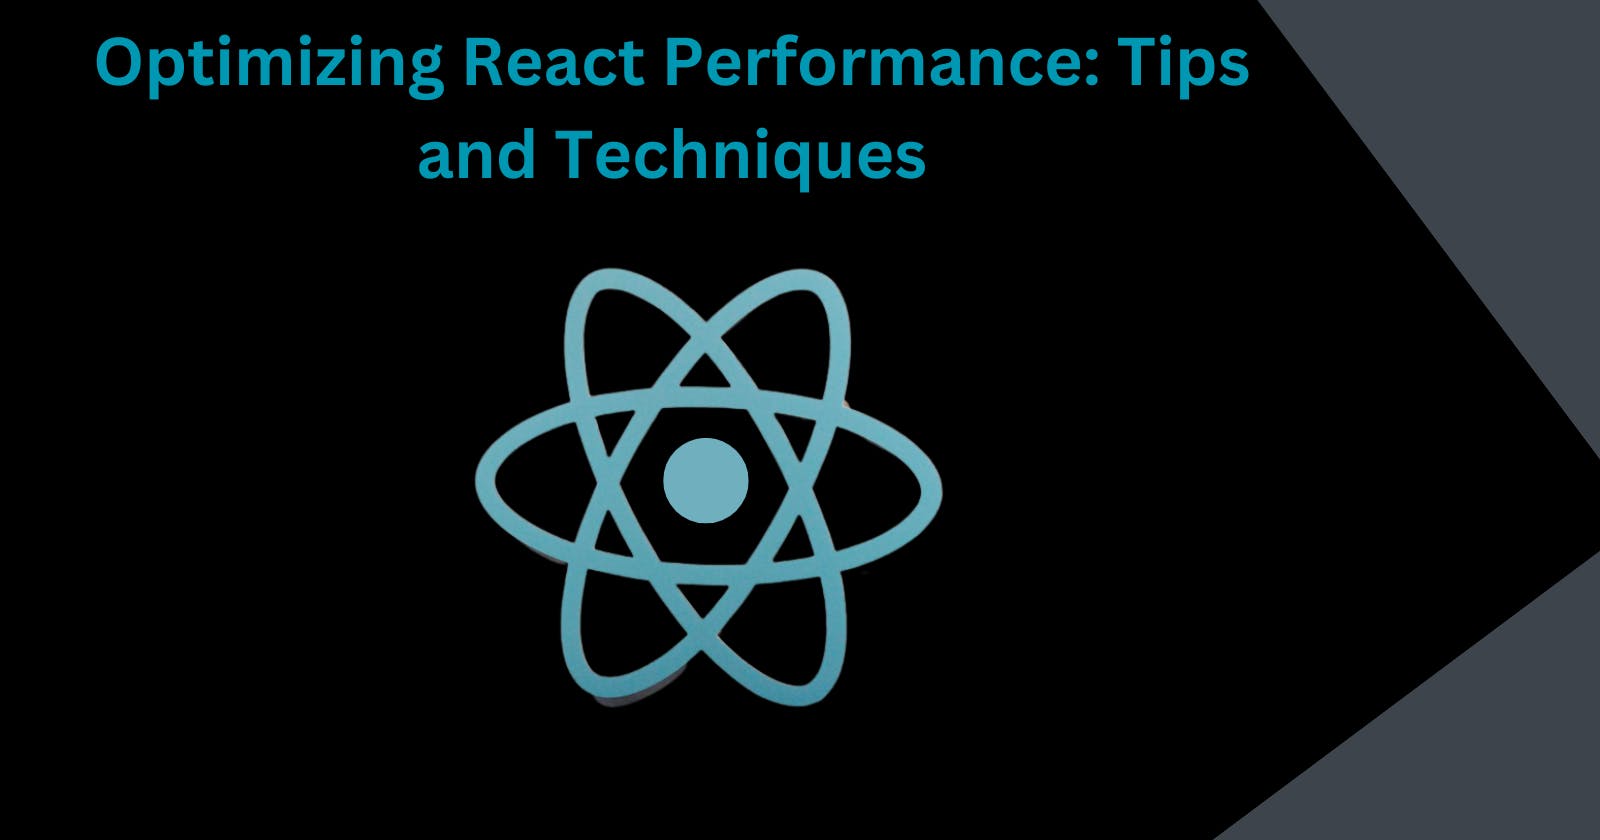 Optimizing React Performance: Tips and Techniques